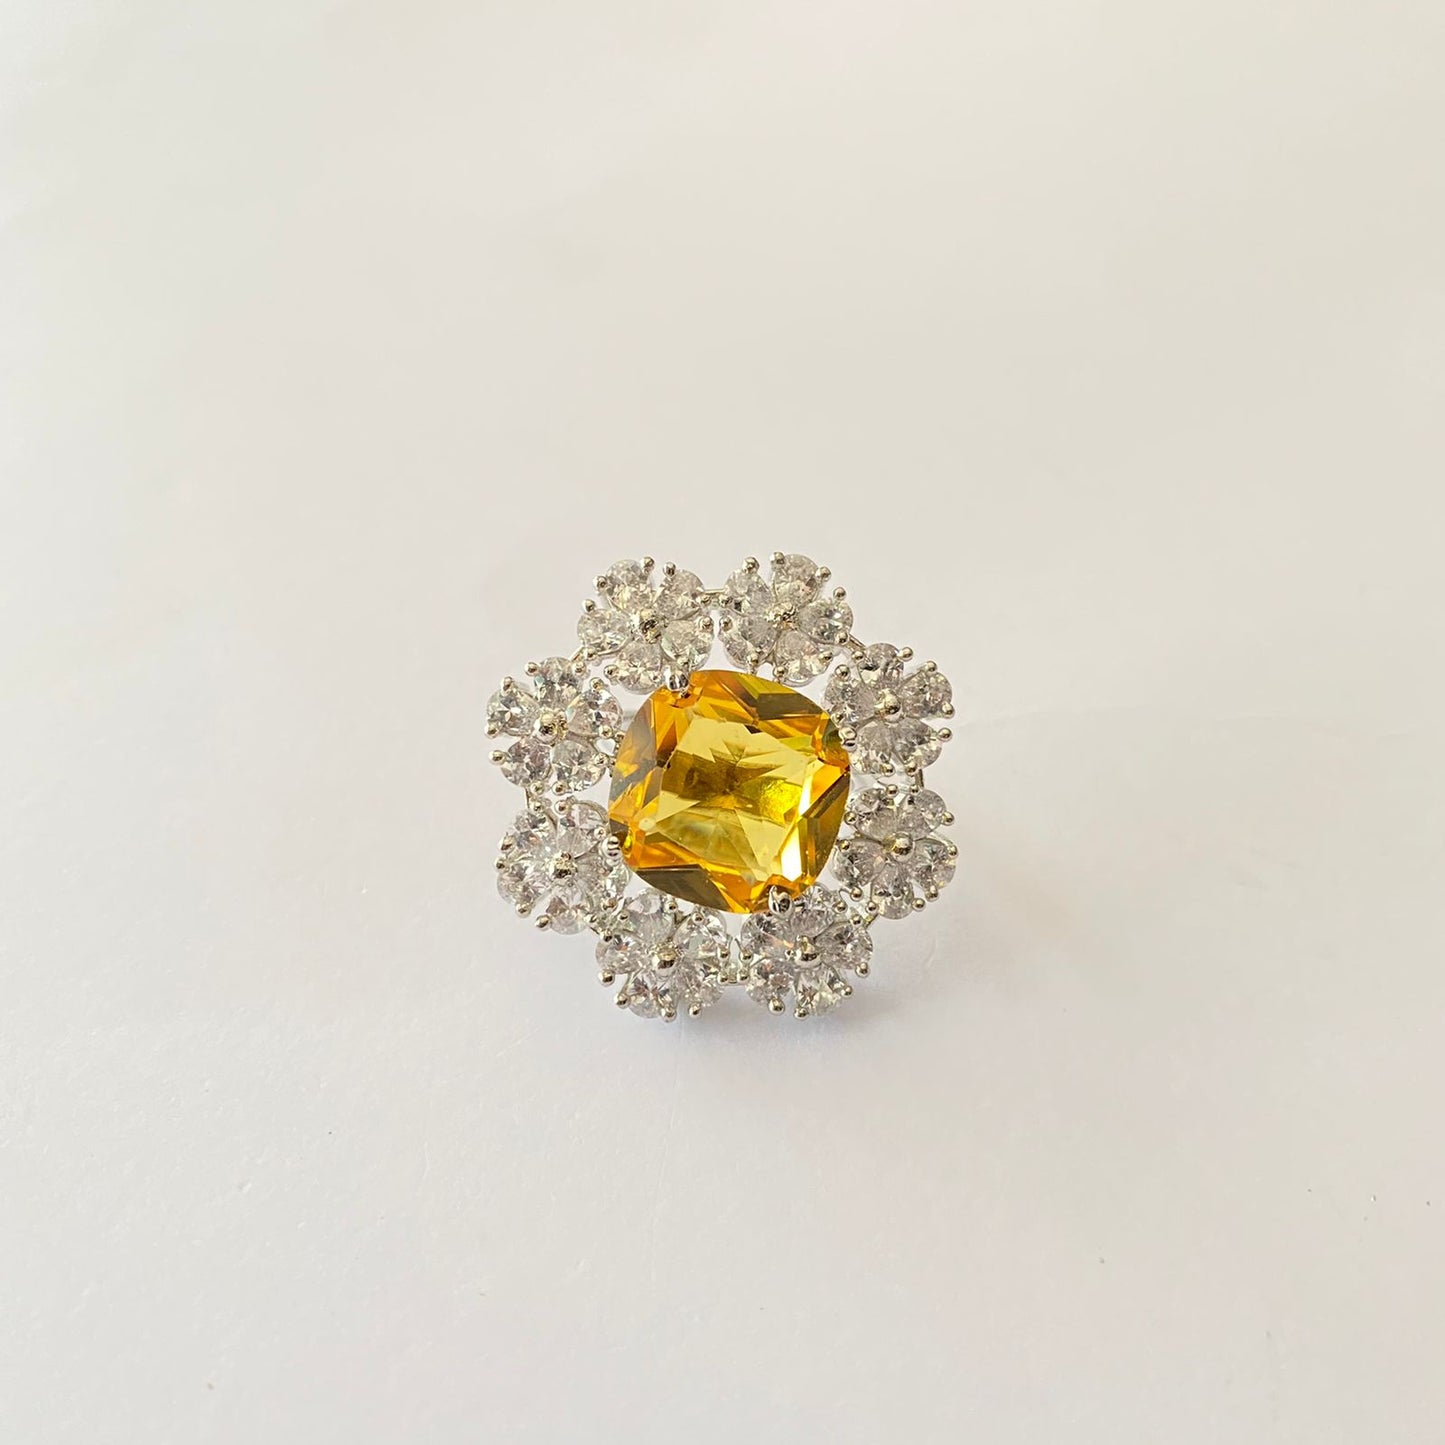 Silver Plated Yellow Diamond Ring